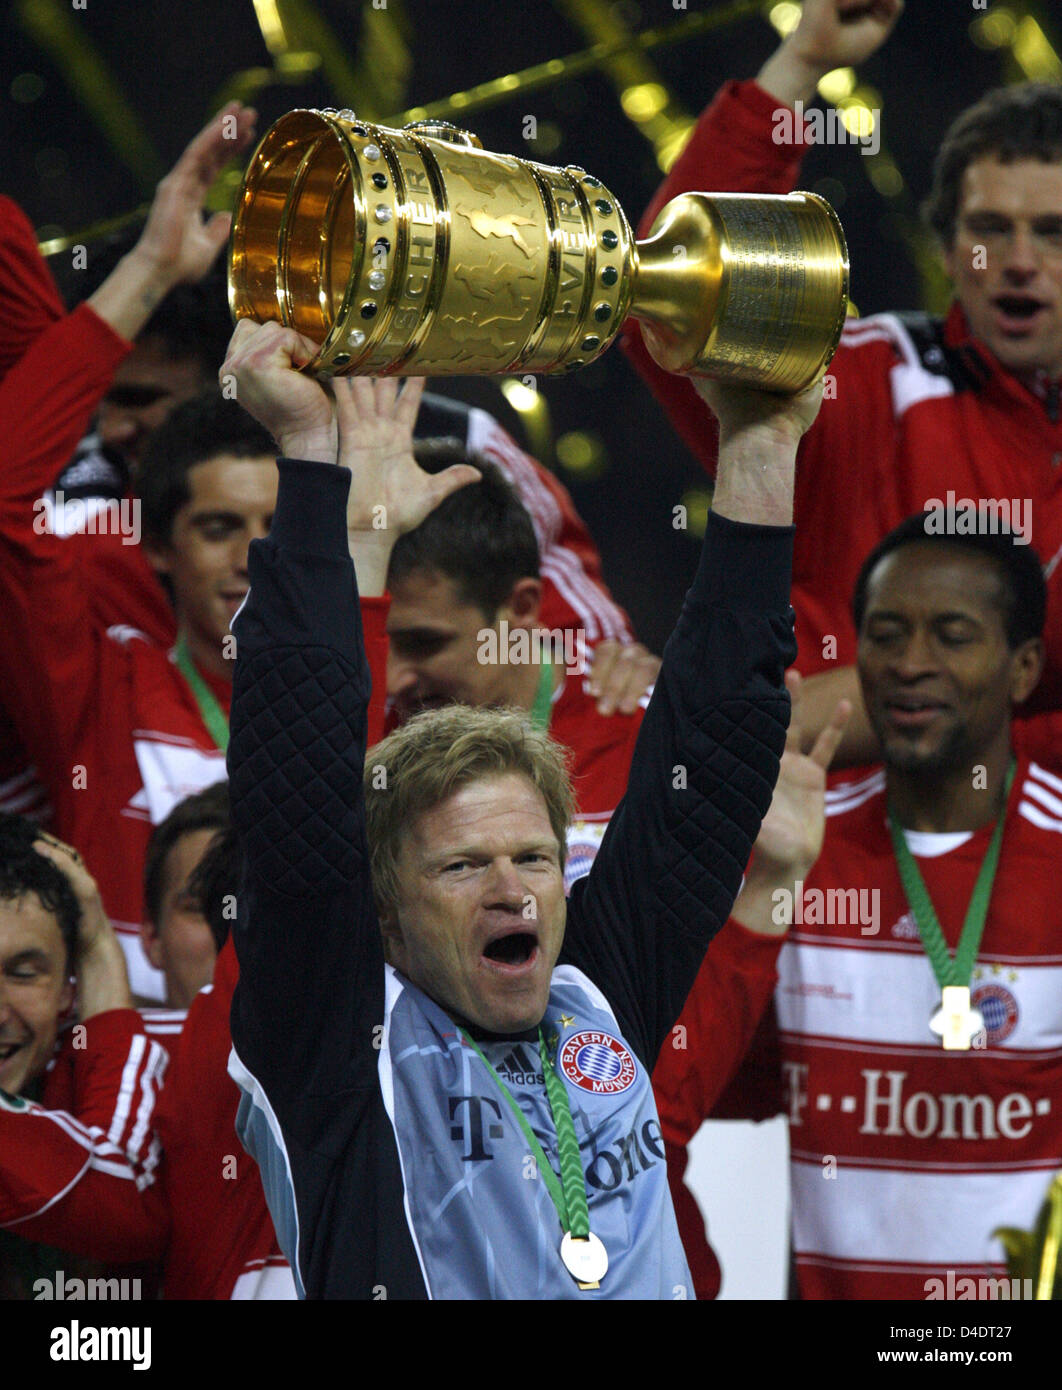 Bayern Munich's goalkeeper Oliver Kahn (front) holds the trophy in front of his team mates after they won the German DFB Cup final against Dortmund at the Olympic stadium in Berlin, Germany, 19 April 2008. Photo: BERND SETTNIK Stock Photo